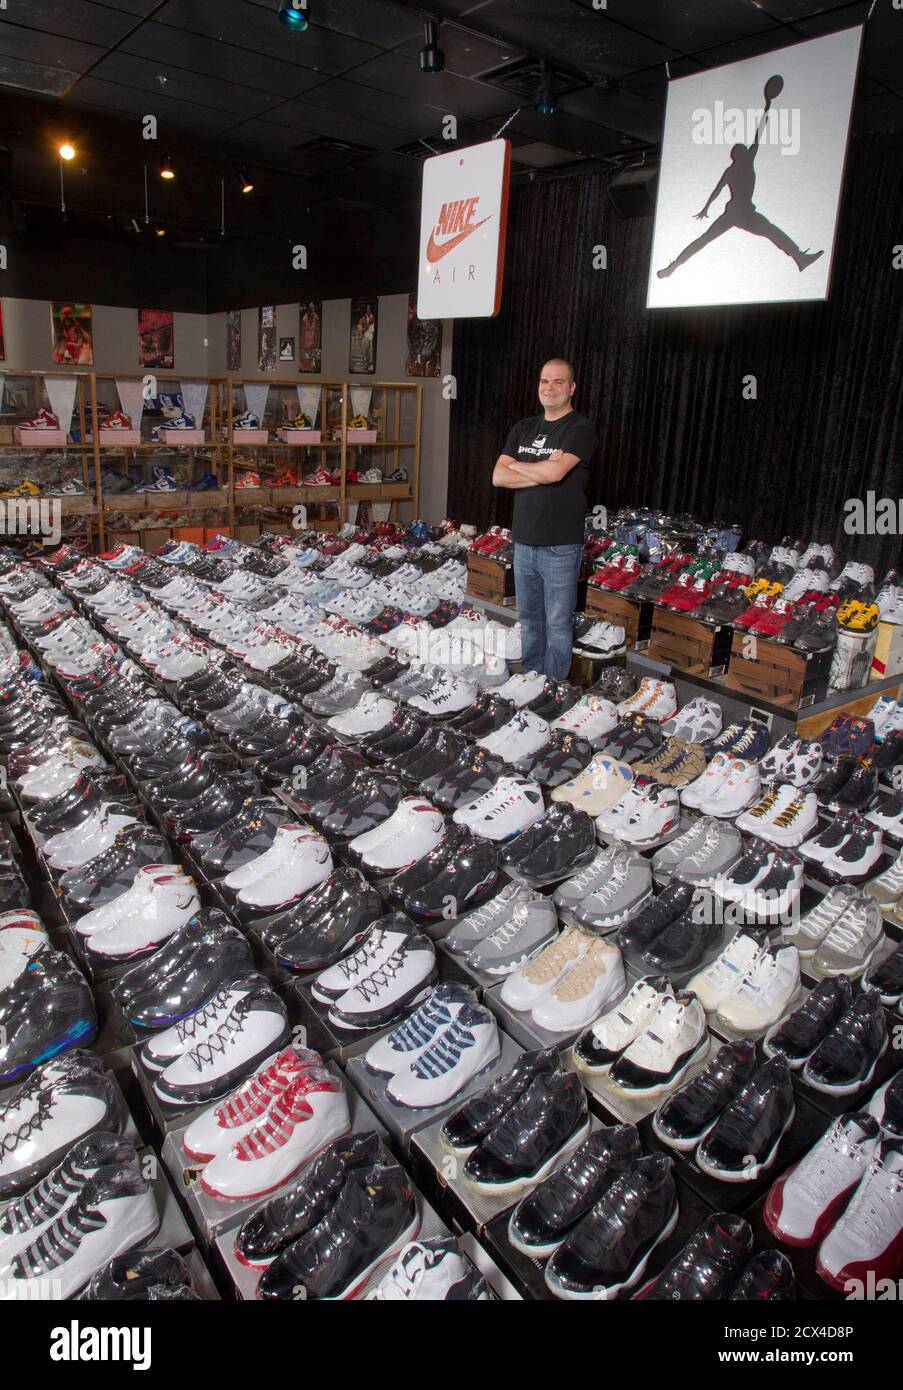 Jordan Michael Geller poses his collection of the Nike Jordan Retro line at the "ShoeZeum" in downtown Las Vegas, Nevada September 25, 2012. Record at the Guinness Book of